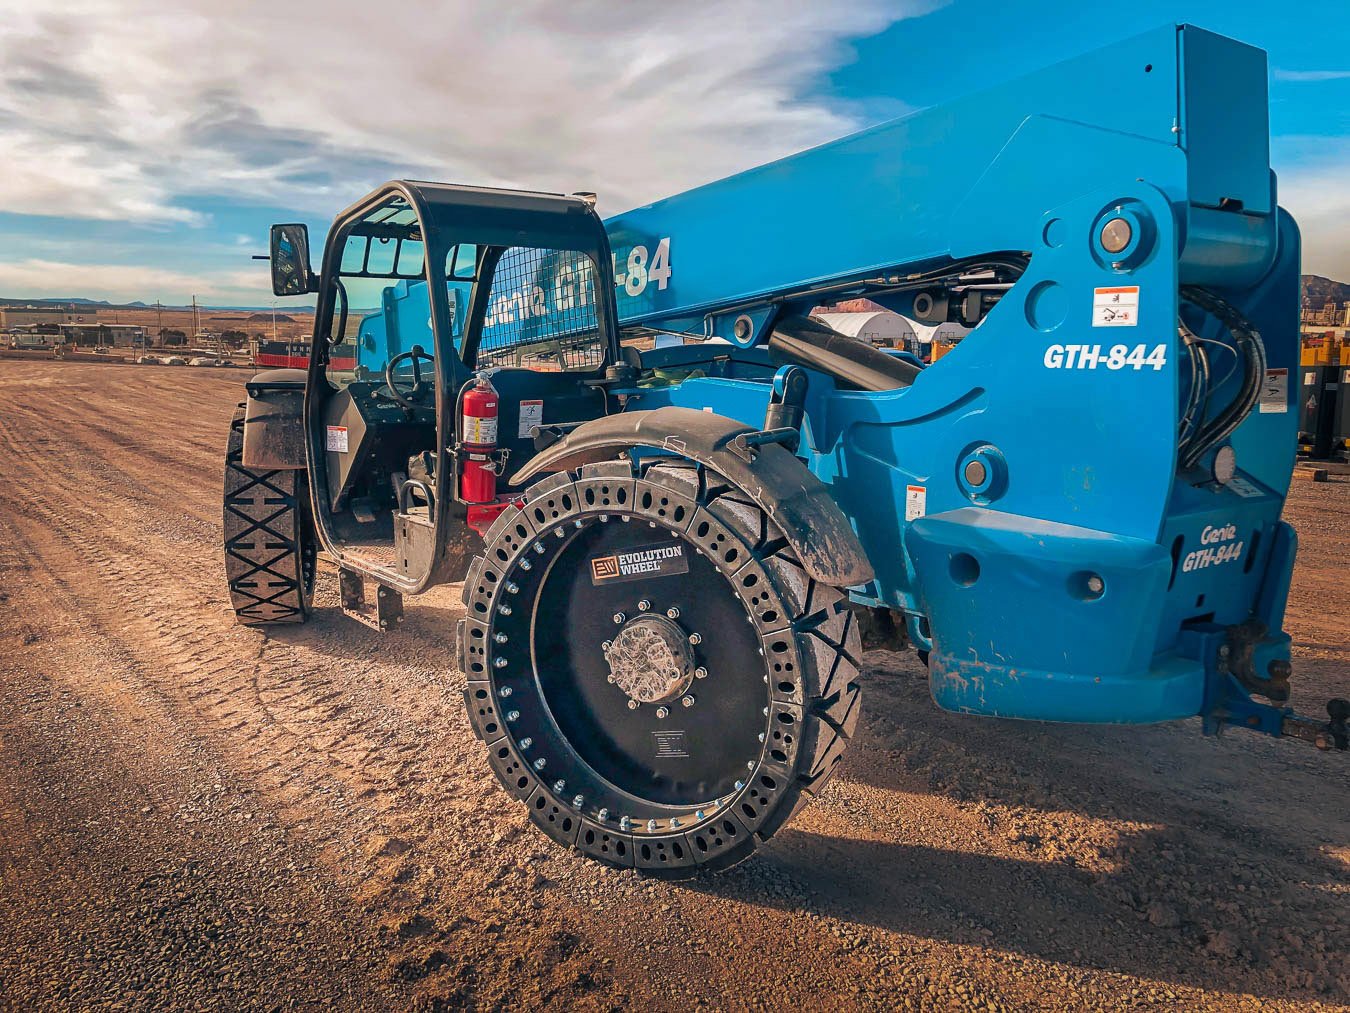 This image shows our telescopic forklift tires for a blue Genie telehandler.